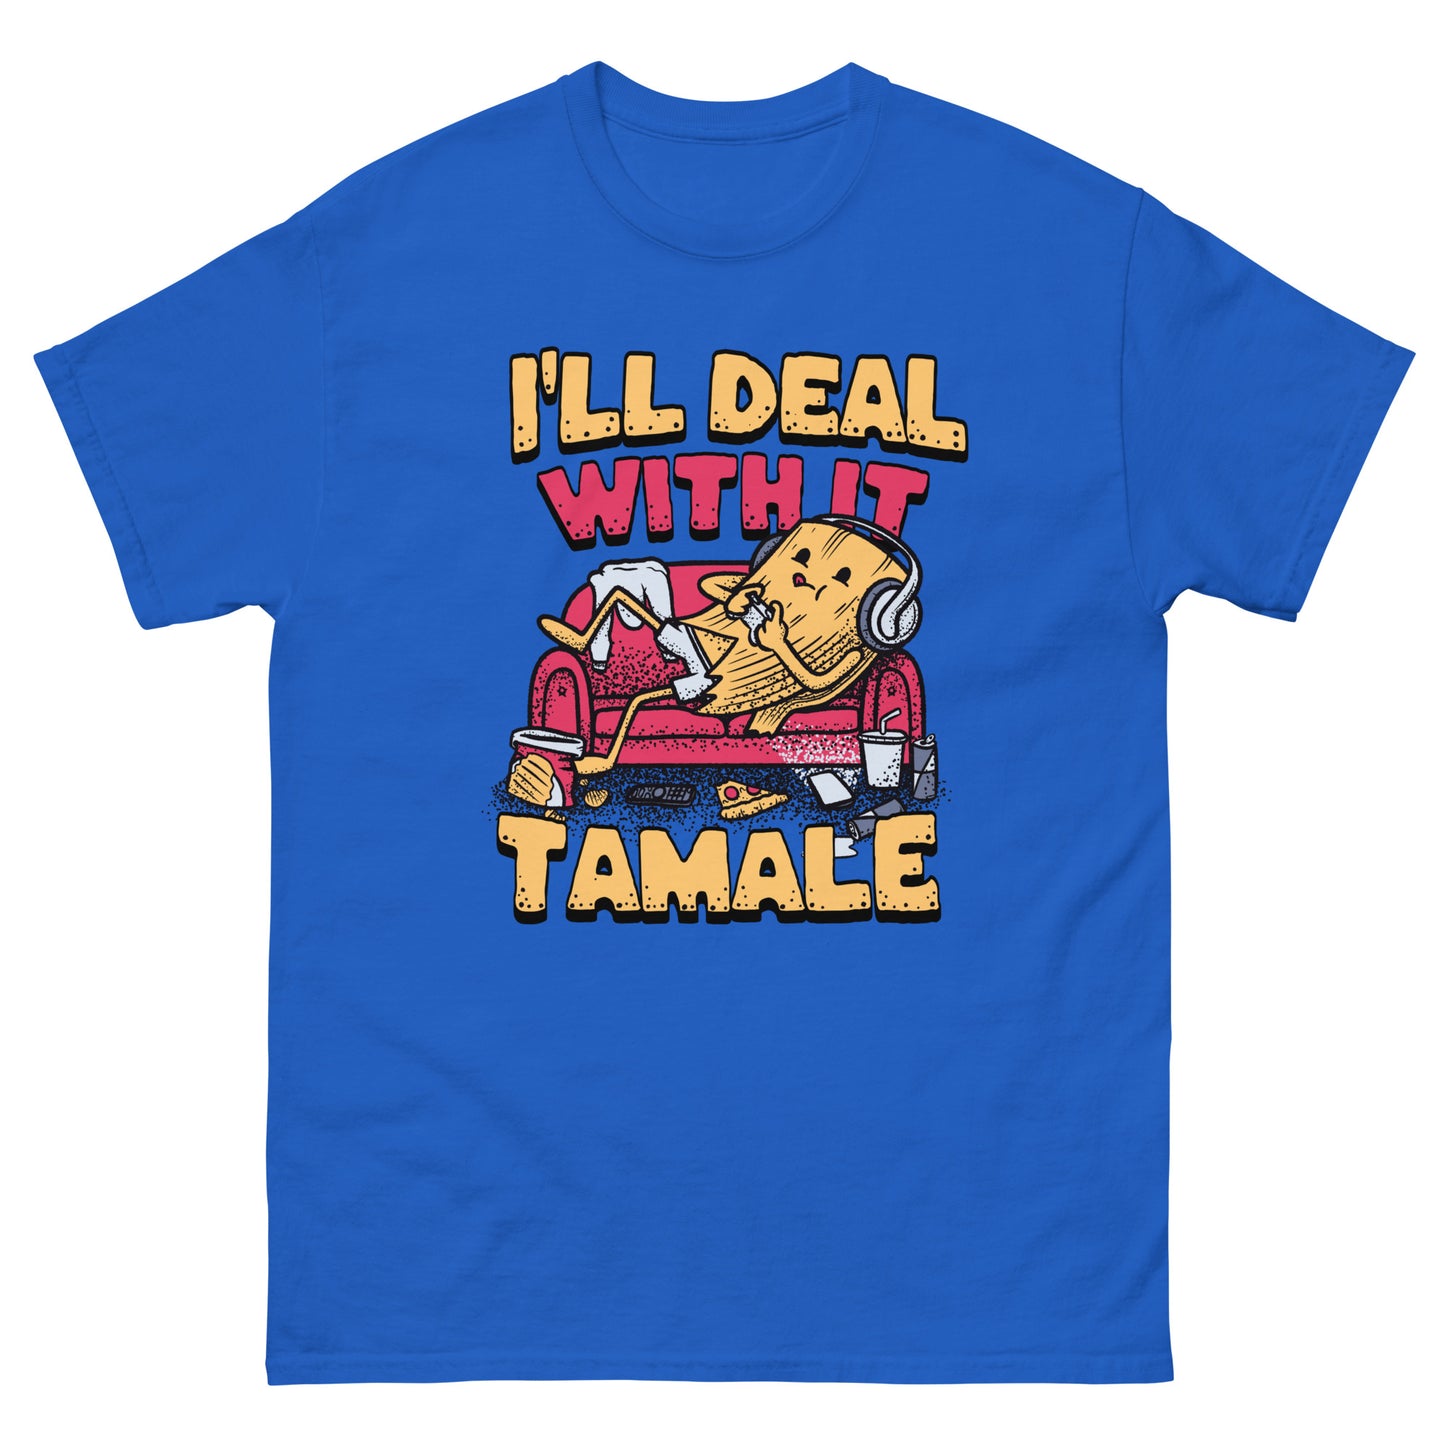 I'll Deal With It Tamale - Funny Mexican Food T-Shirt